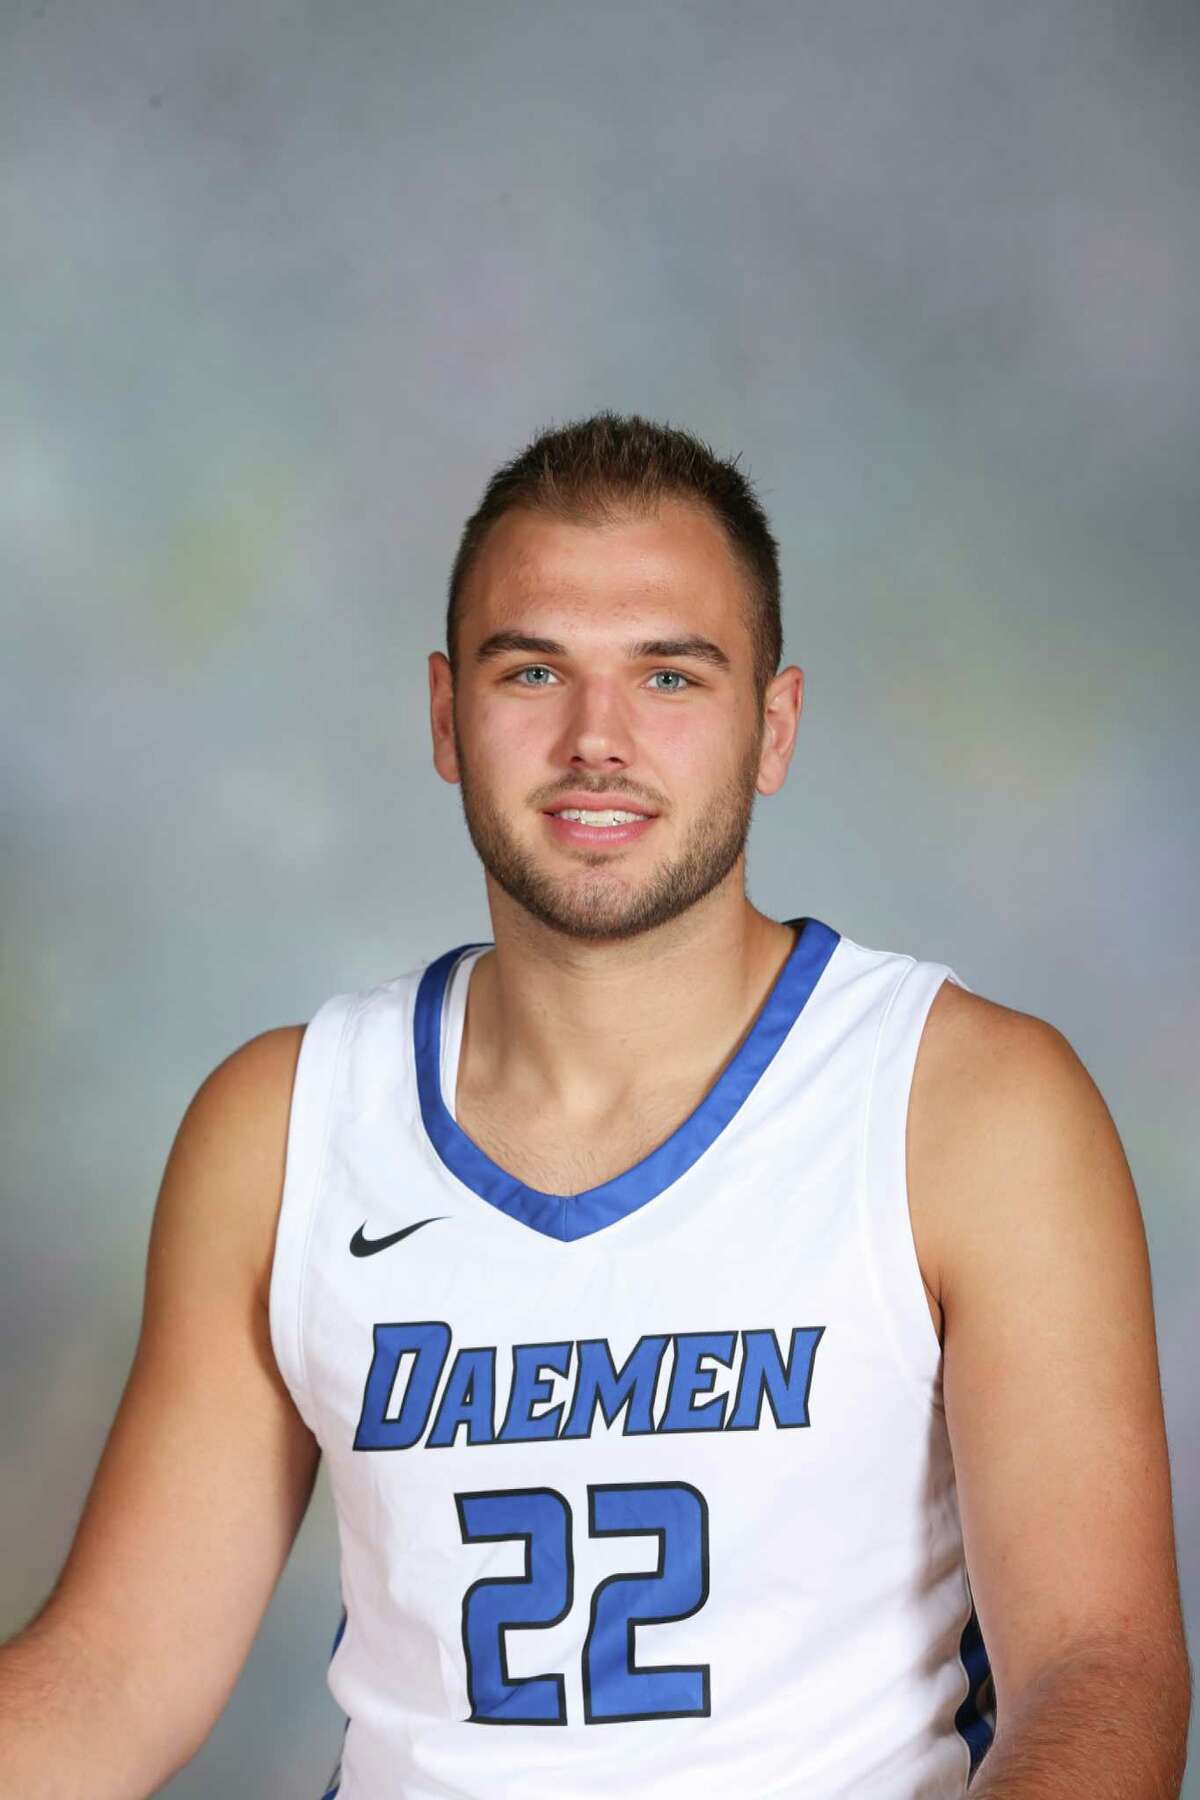 Daemen graduate student Andrew Sischo, a 6-foot-9, 240-pound center from Guilderland, was named Offensive Player of the Week by the East Coast Conference.